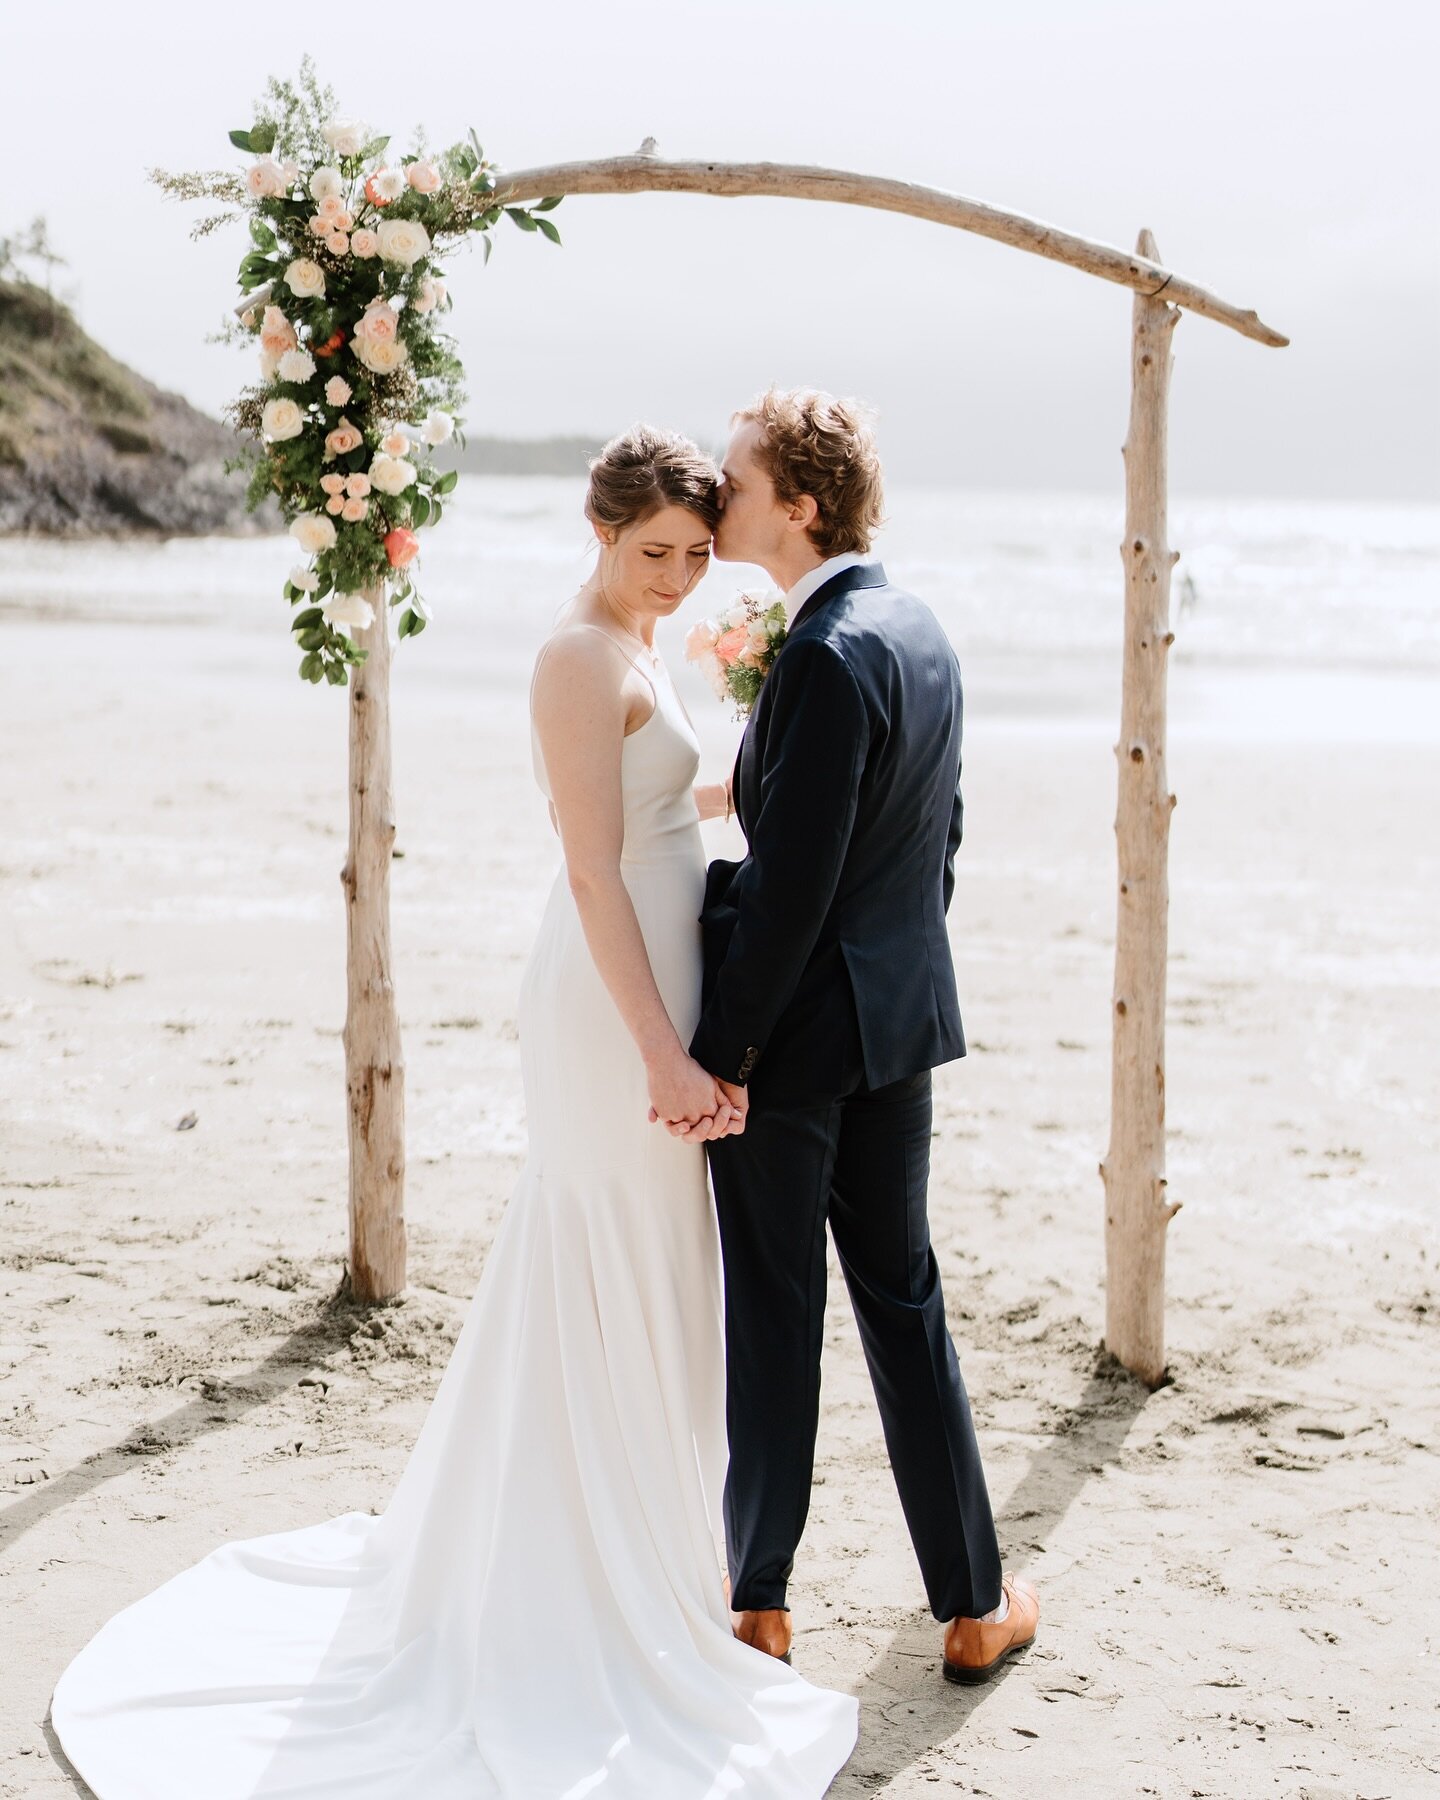 Happy anniversary to R+A! It&rsquo;s been a year since I got to do your florals and they are still a favourite! Dreamy weddings on the west coast are some of my favourite and R+A really got the perfect day: surf, sunshine and a stunning sunset. What 